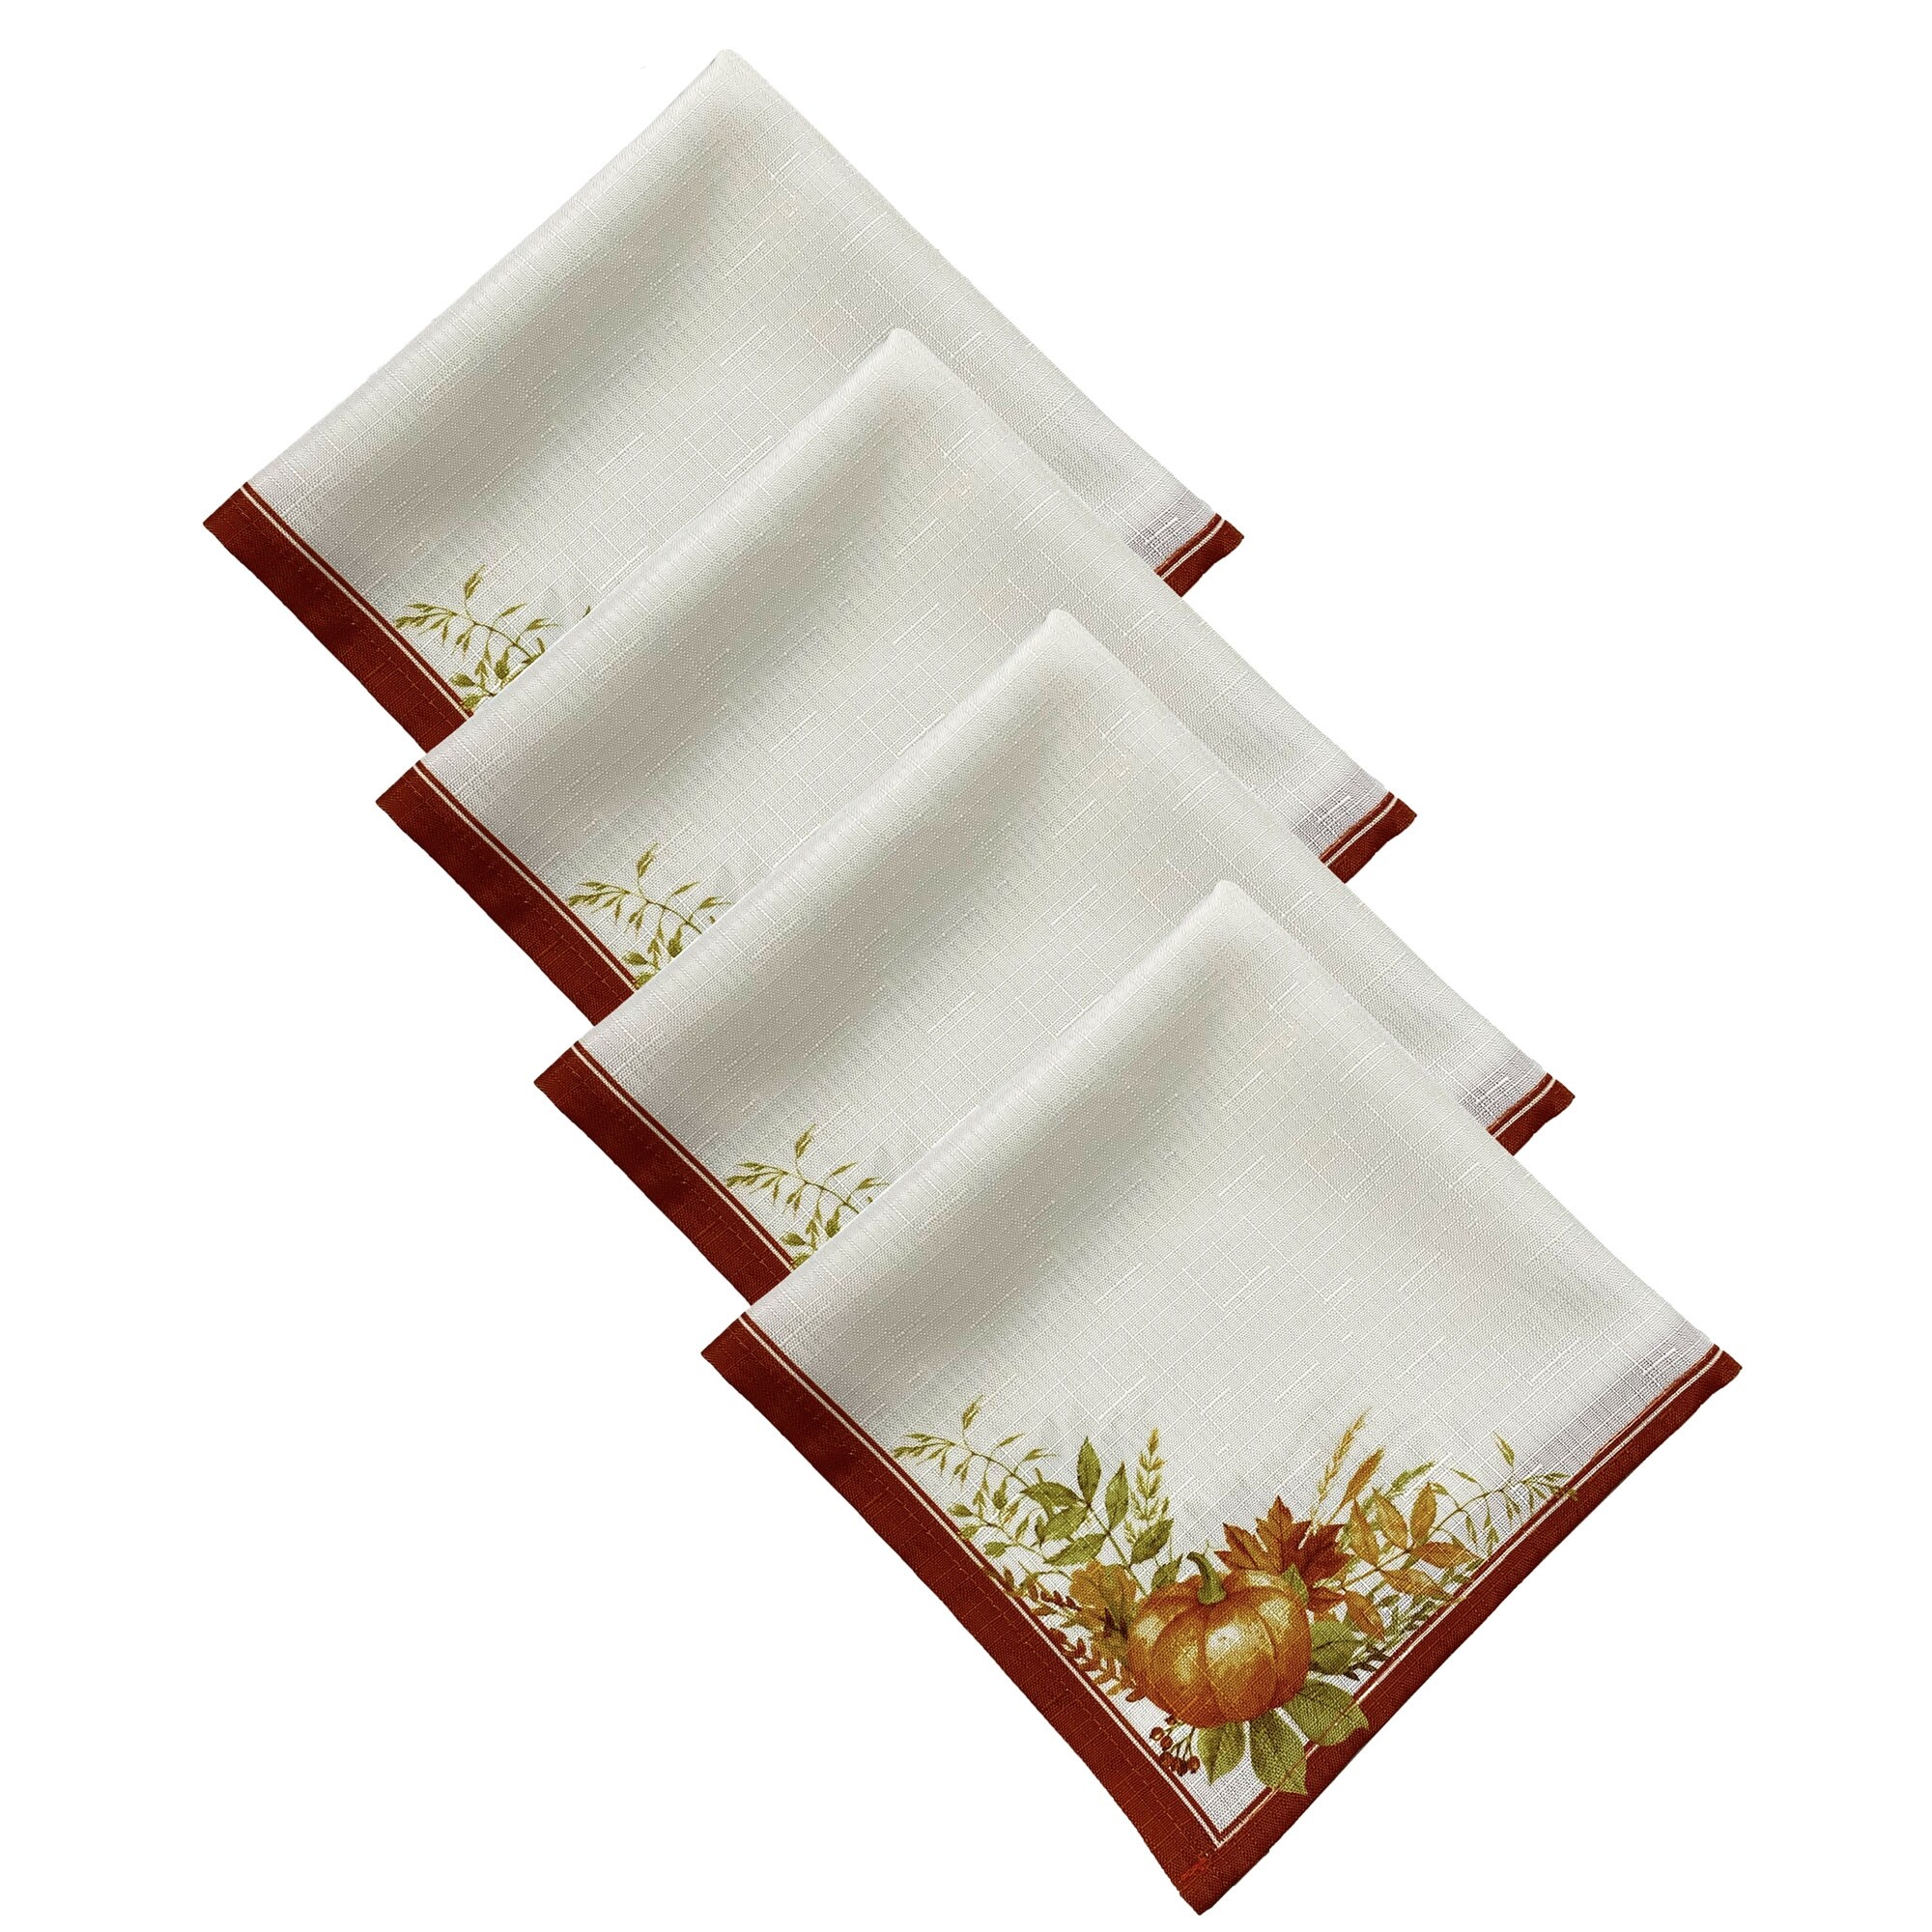 Fall Cloth Napkins Set of 4 Packs Wrinkle Free Washable Soft Textured  Polyester Fabric Napkins for Autumn, Thanksgiving, Party, Holiday (4  Pieces, 20